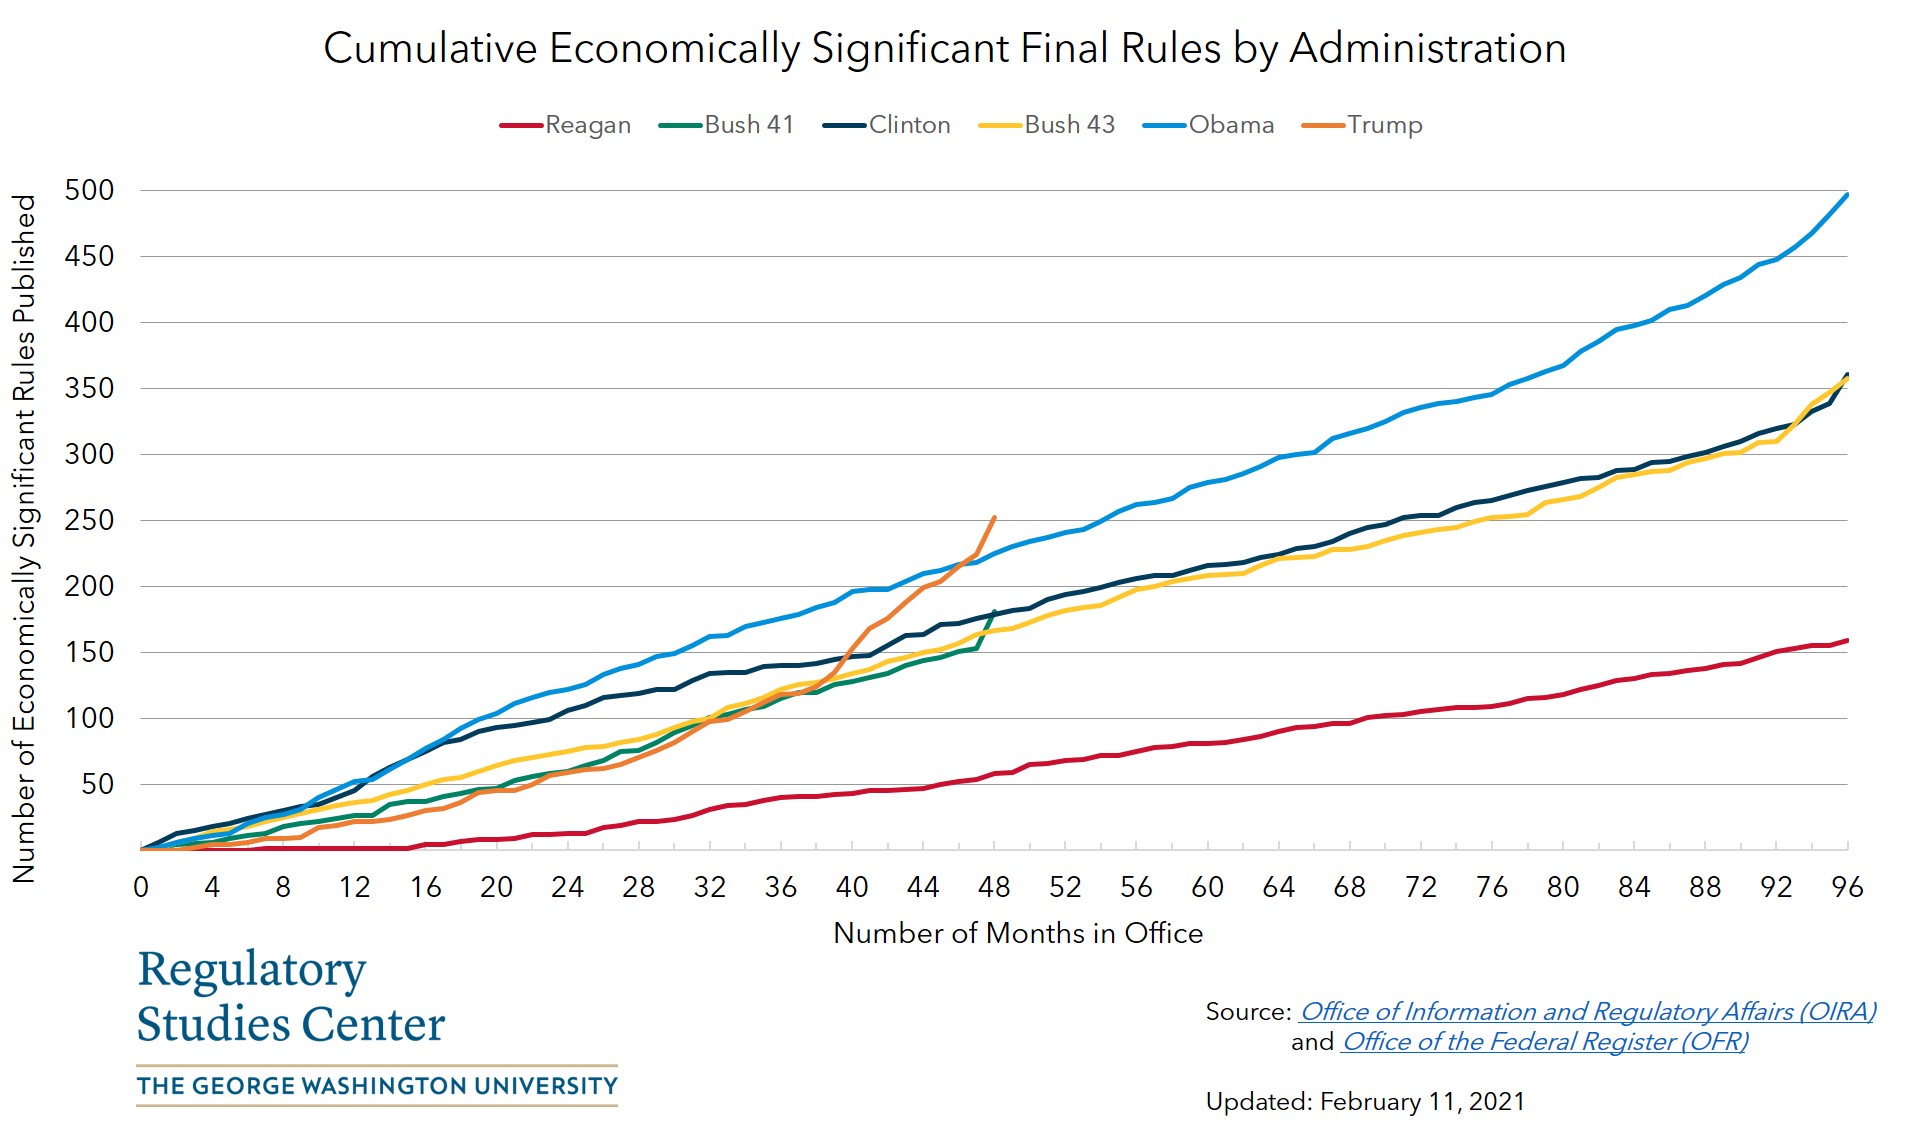 Line graph of major rules for various administrations by month.